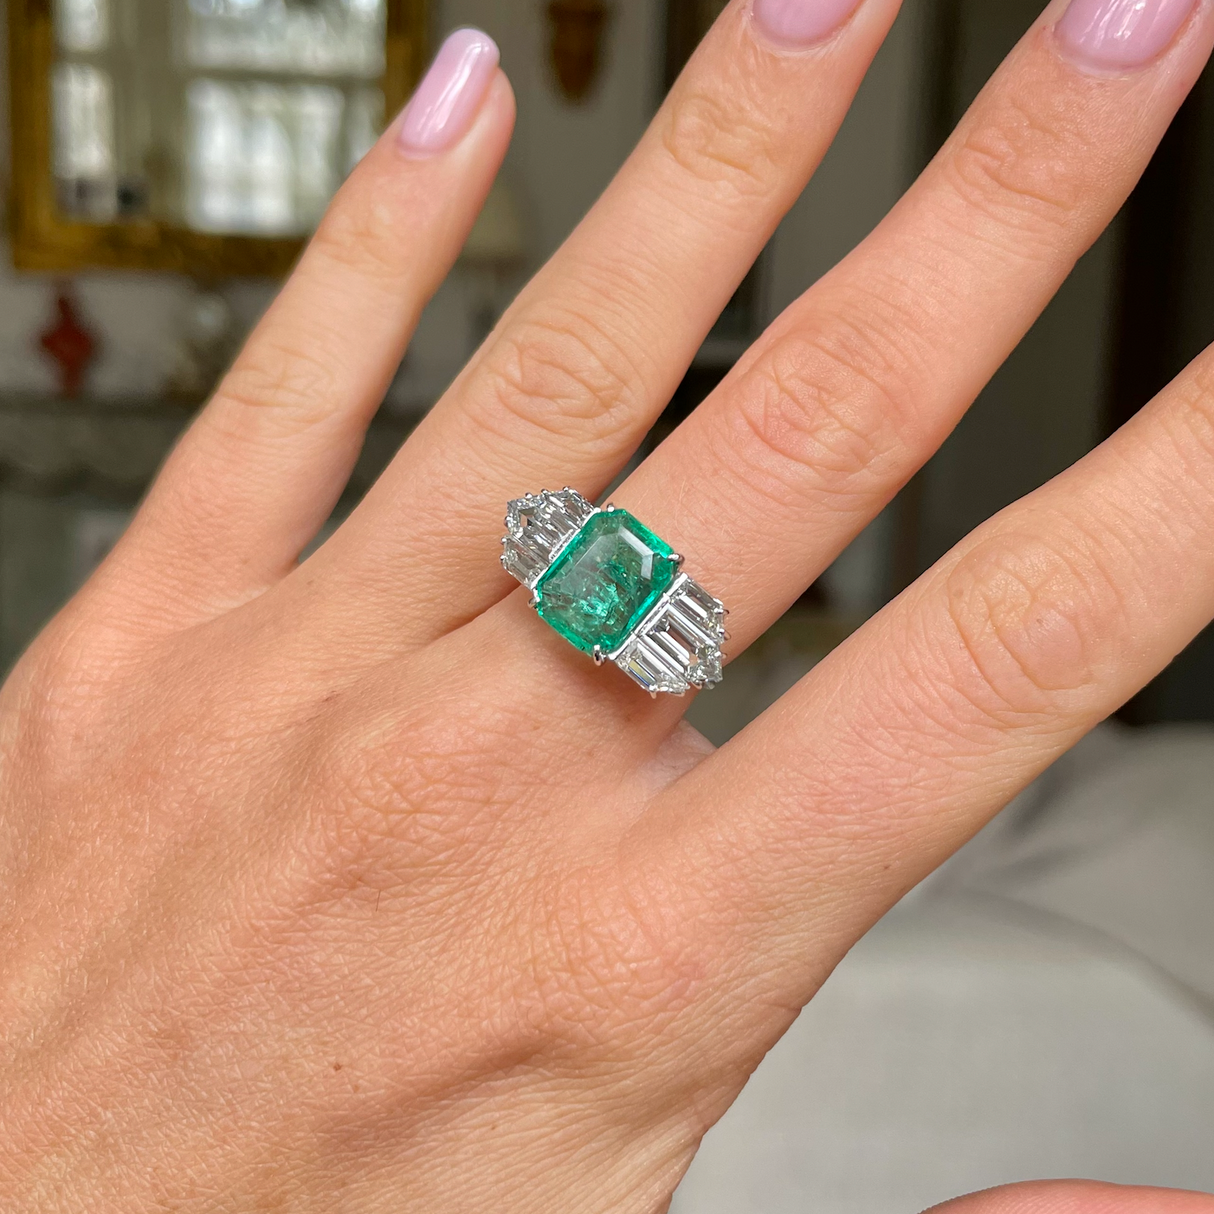 Vintage emerald and diamond engagement ring, worn on hand.